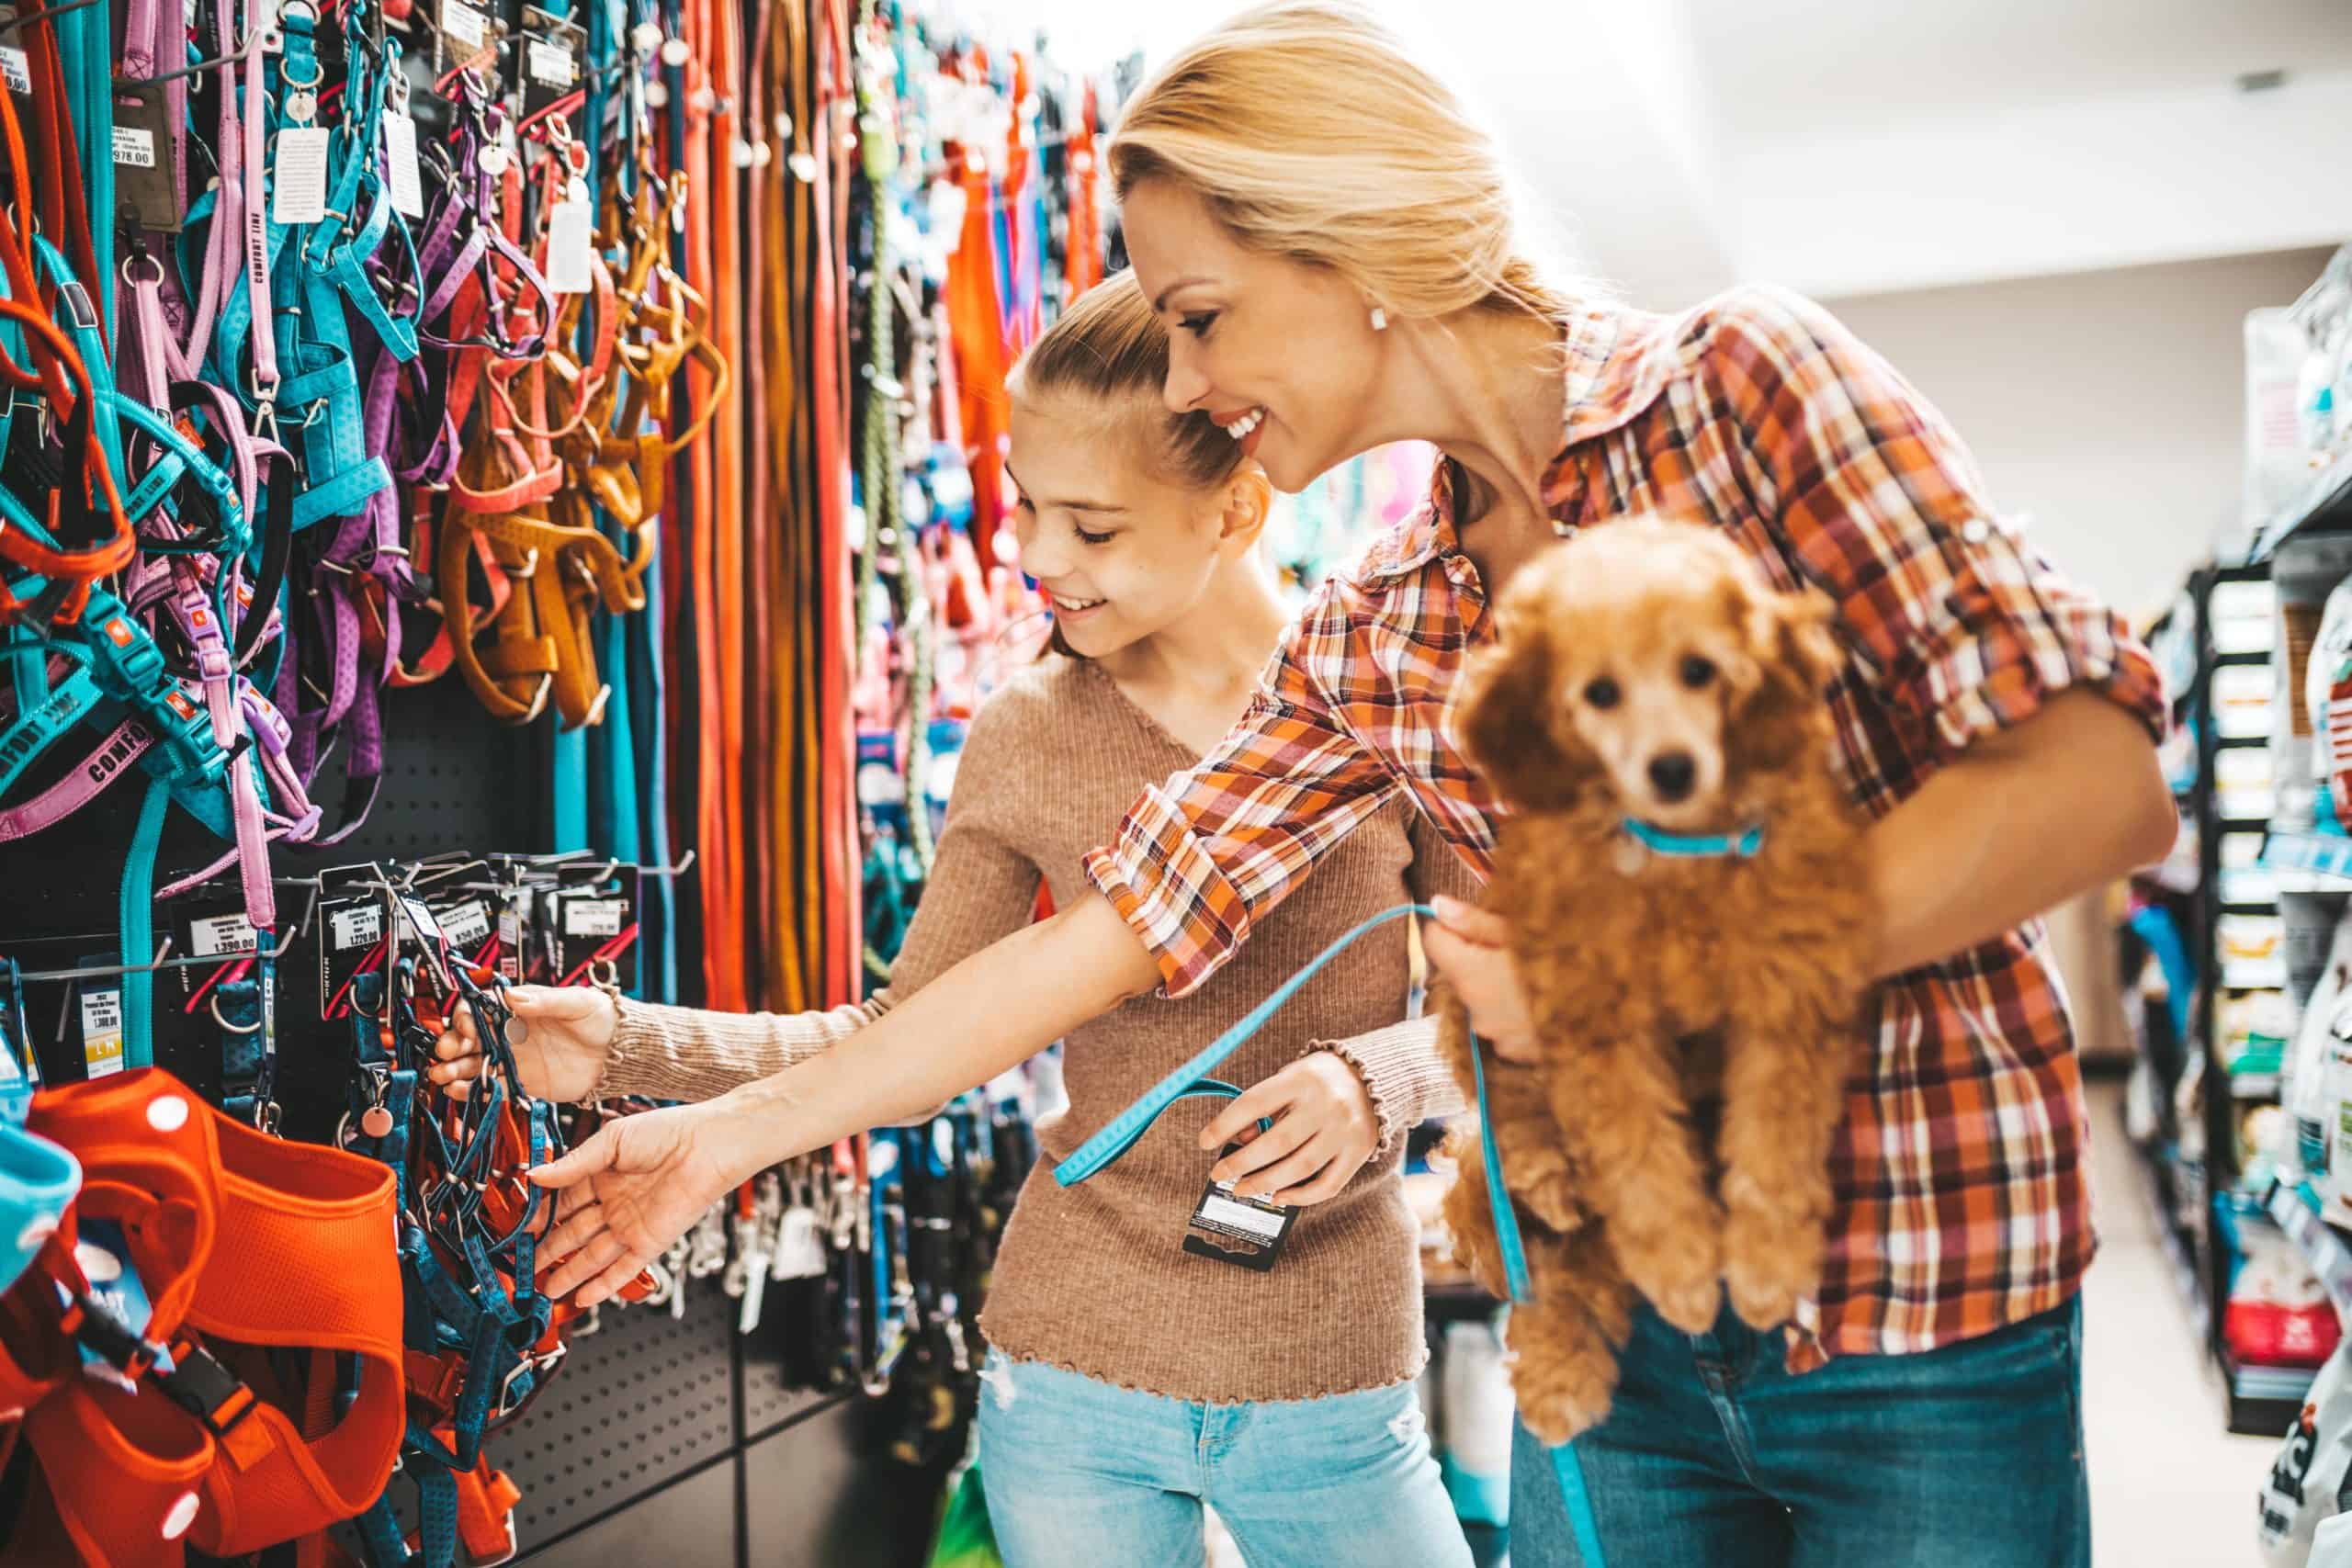 Mom and daughter buy supplies for pet poodle. Buying pet insurance could end up being a good way to save money on medical supplies and medications down the road.